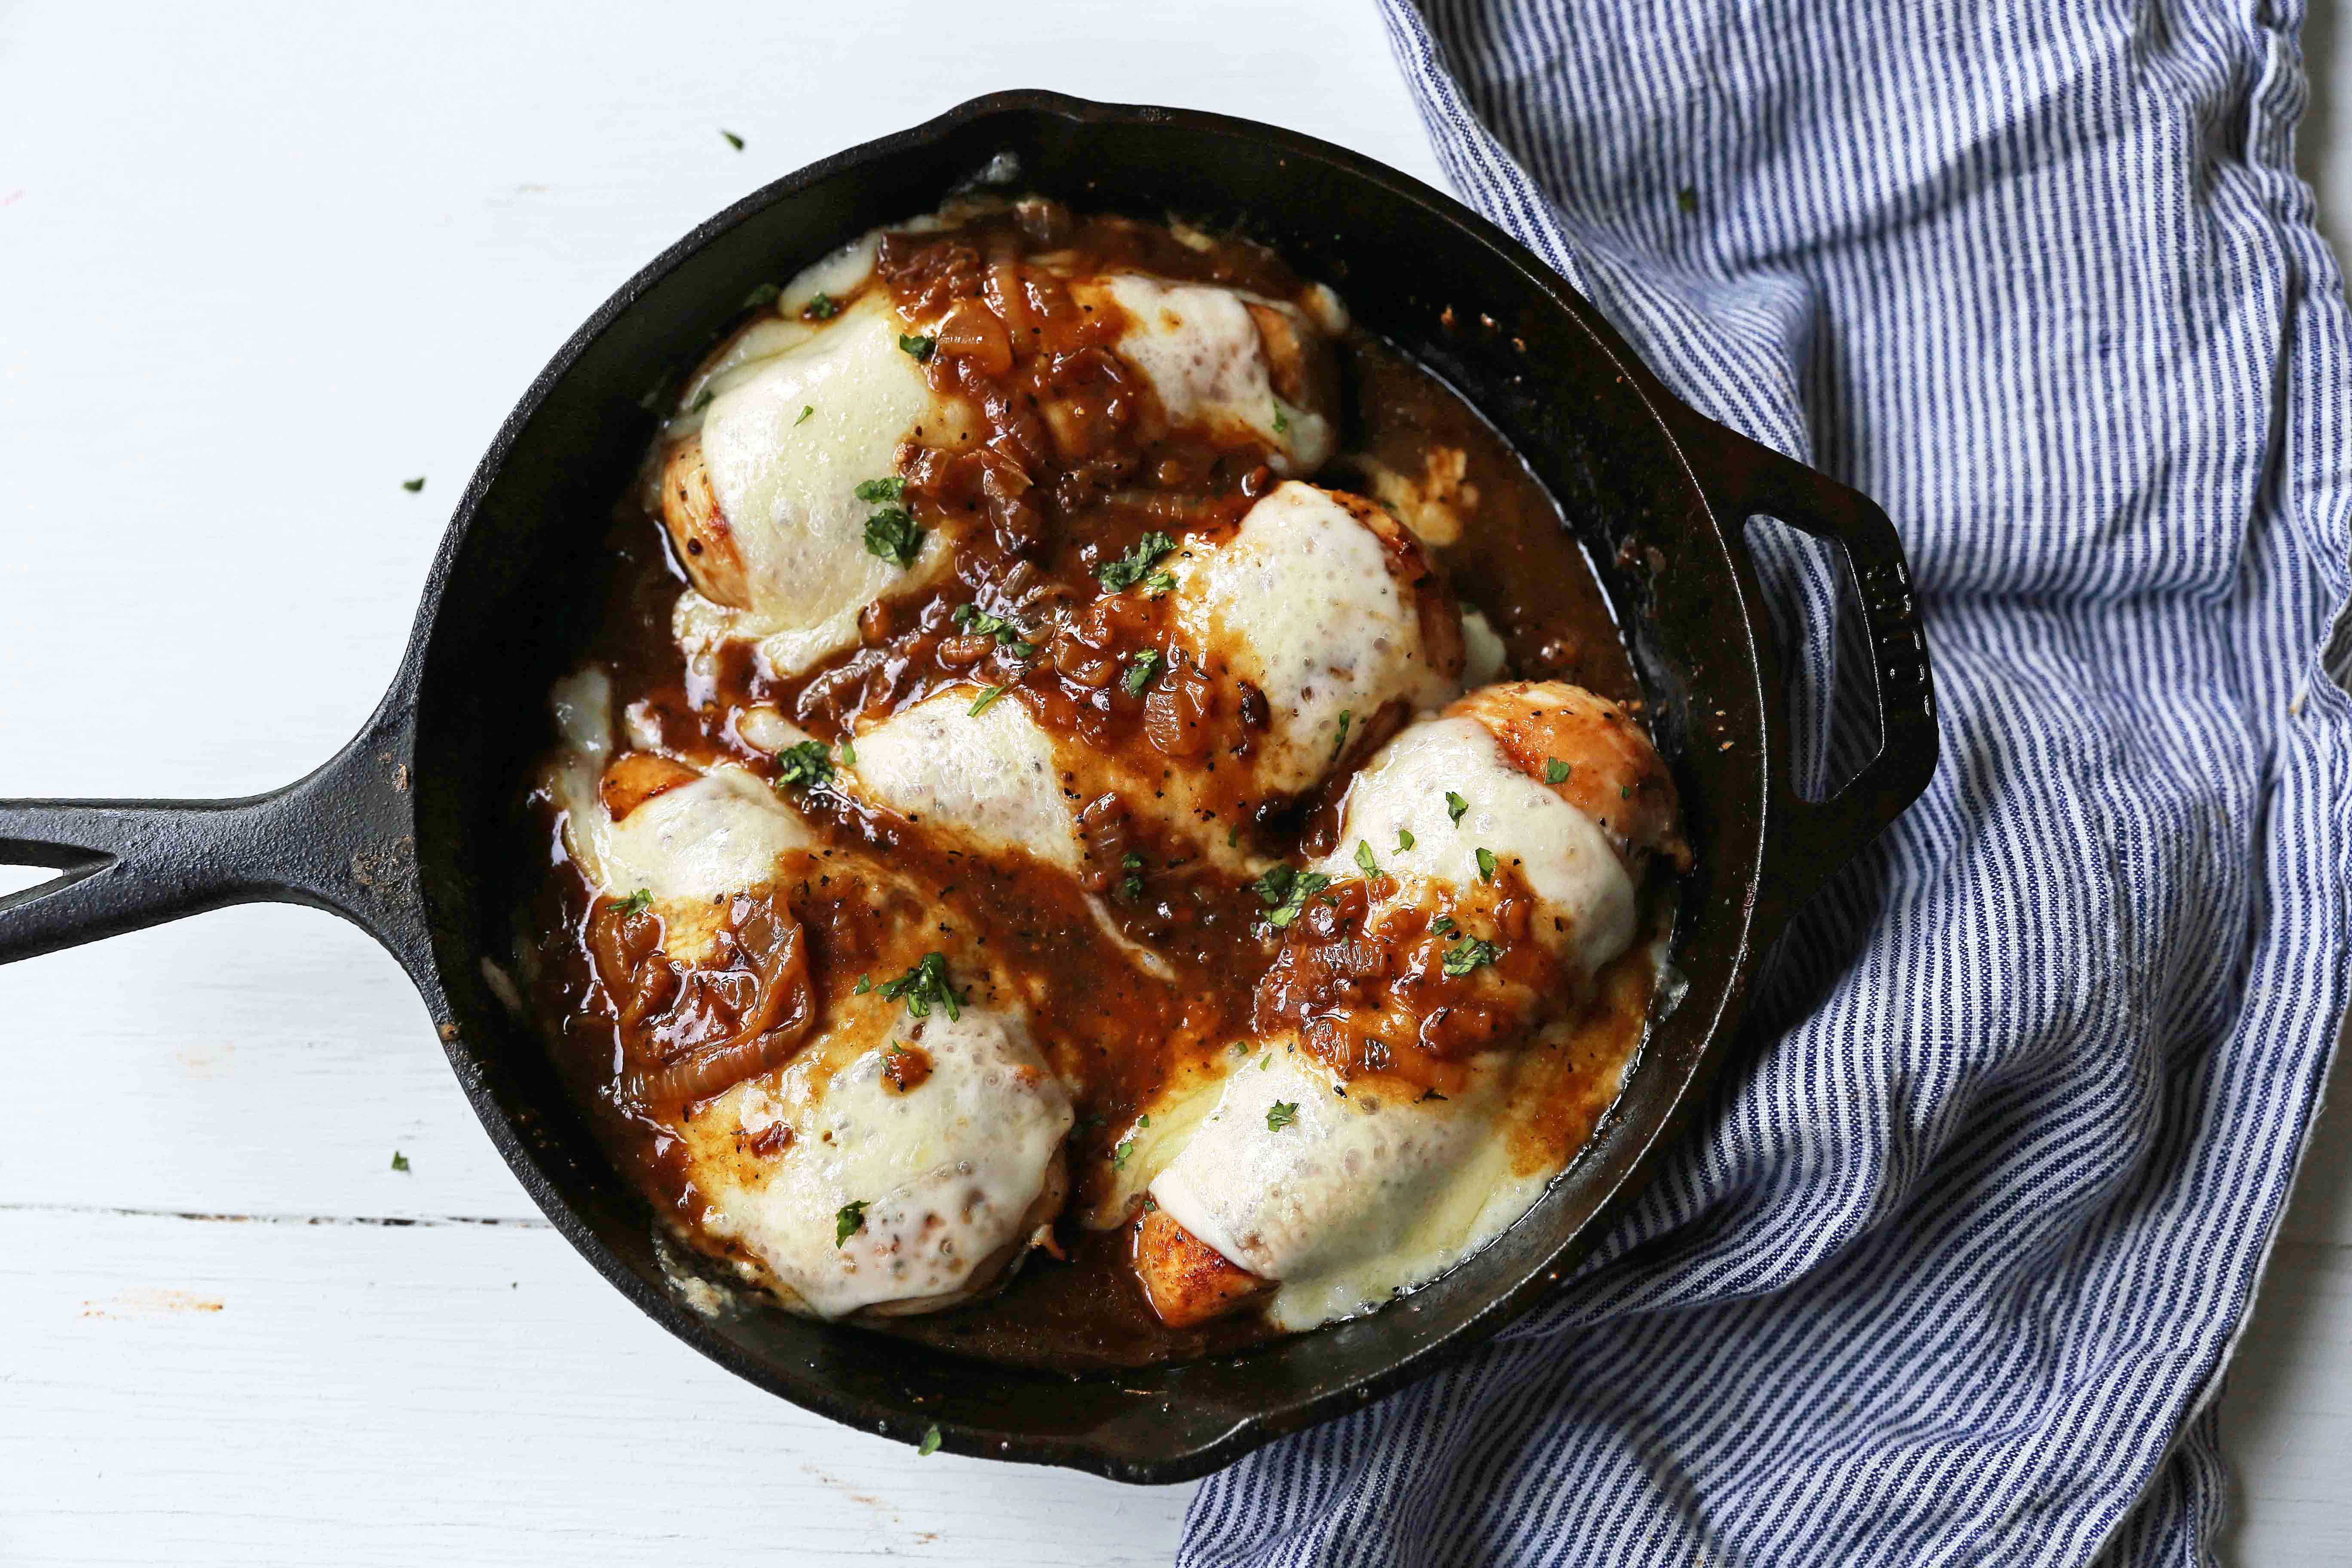 French Onion Chicken Skillet Chicken with Buttery Caramelized Onion Gravy and Melted Cheeses. A simple, flavorful, 30-minute meal! www.modernhoney.com #30minutemeal #dinnerrecipe #frenchonionchicken #cheesychicken #chickendinner